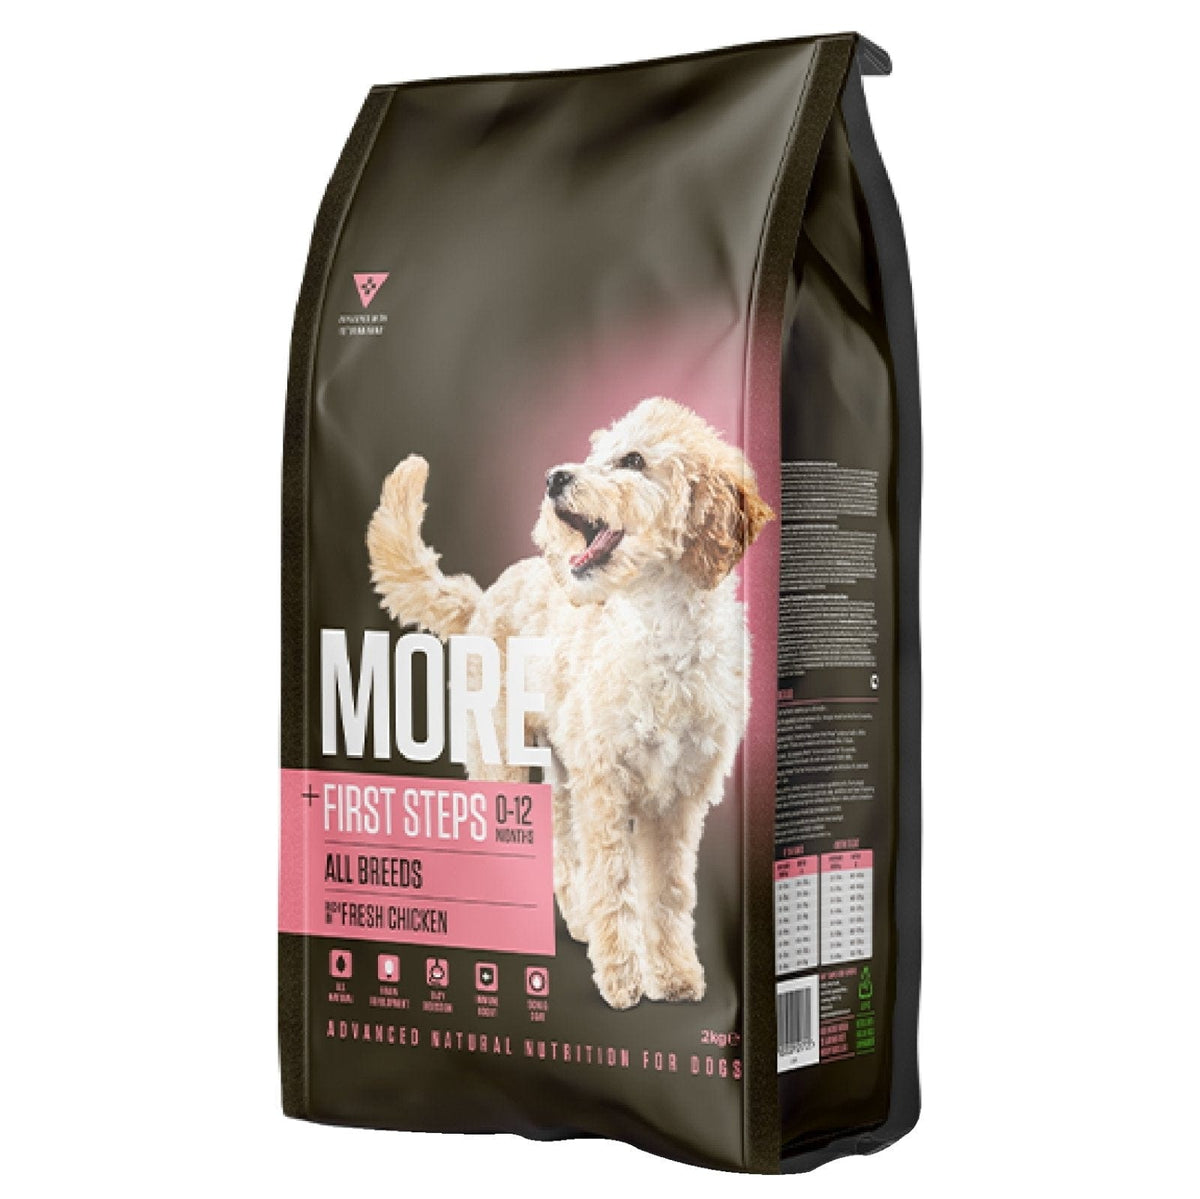 More First Steps Chicken Dry Dog Food - Walkies